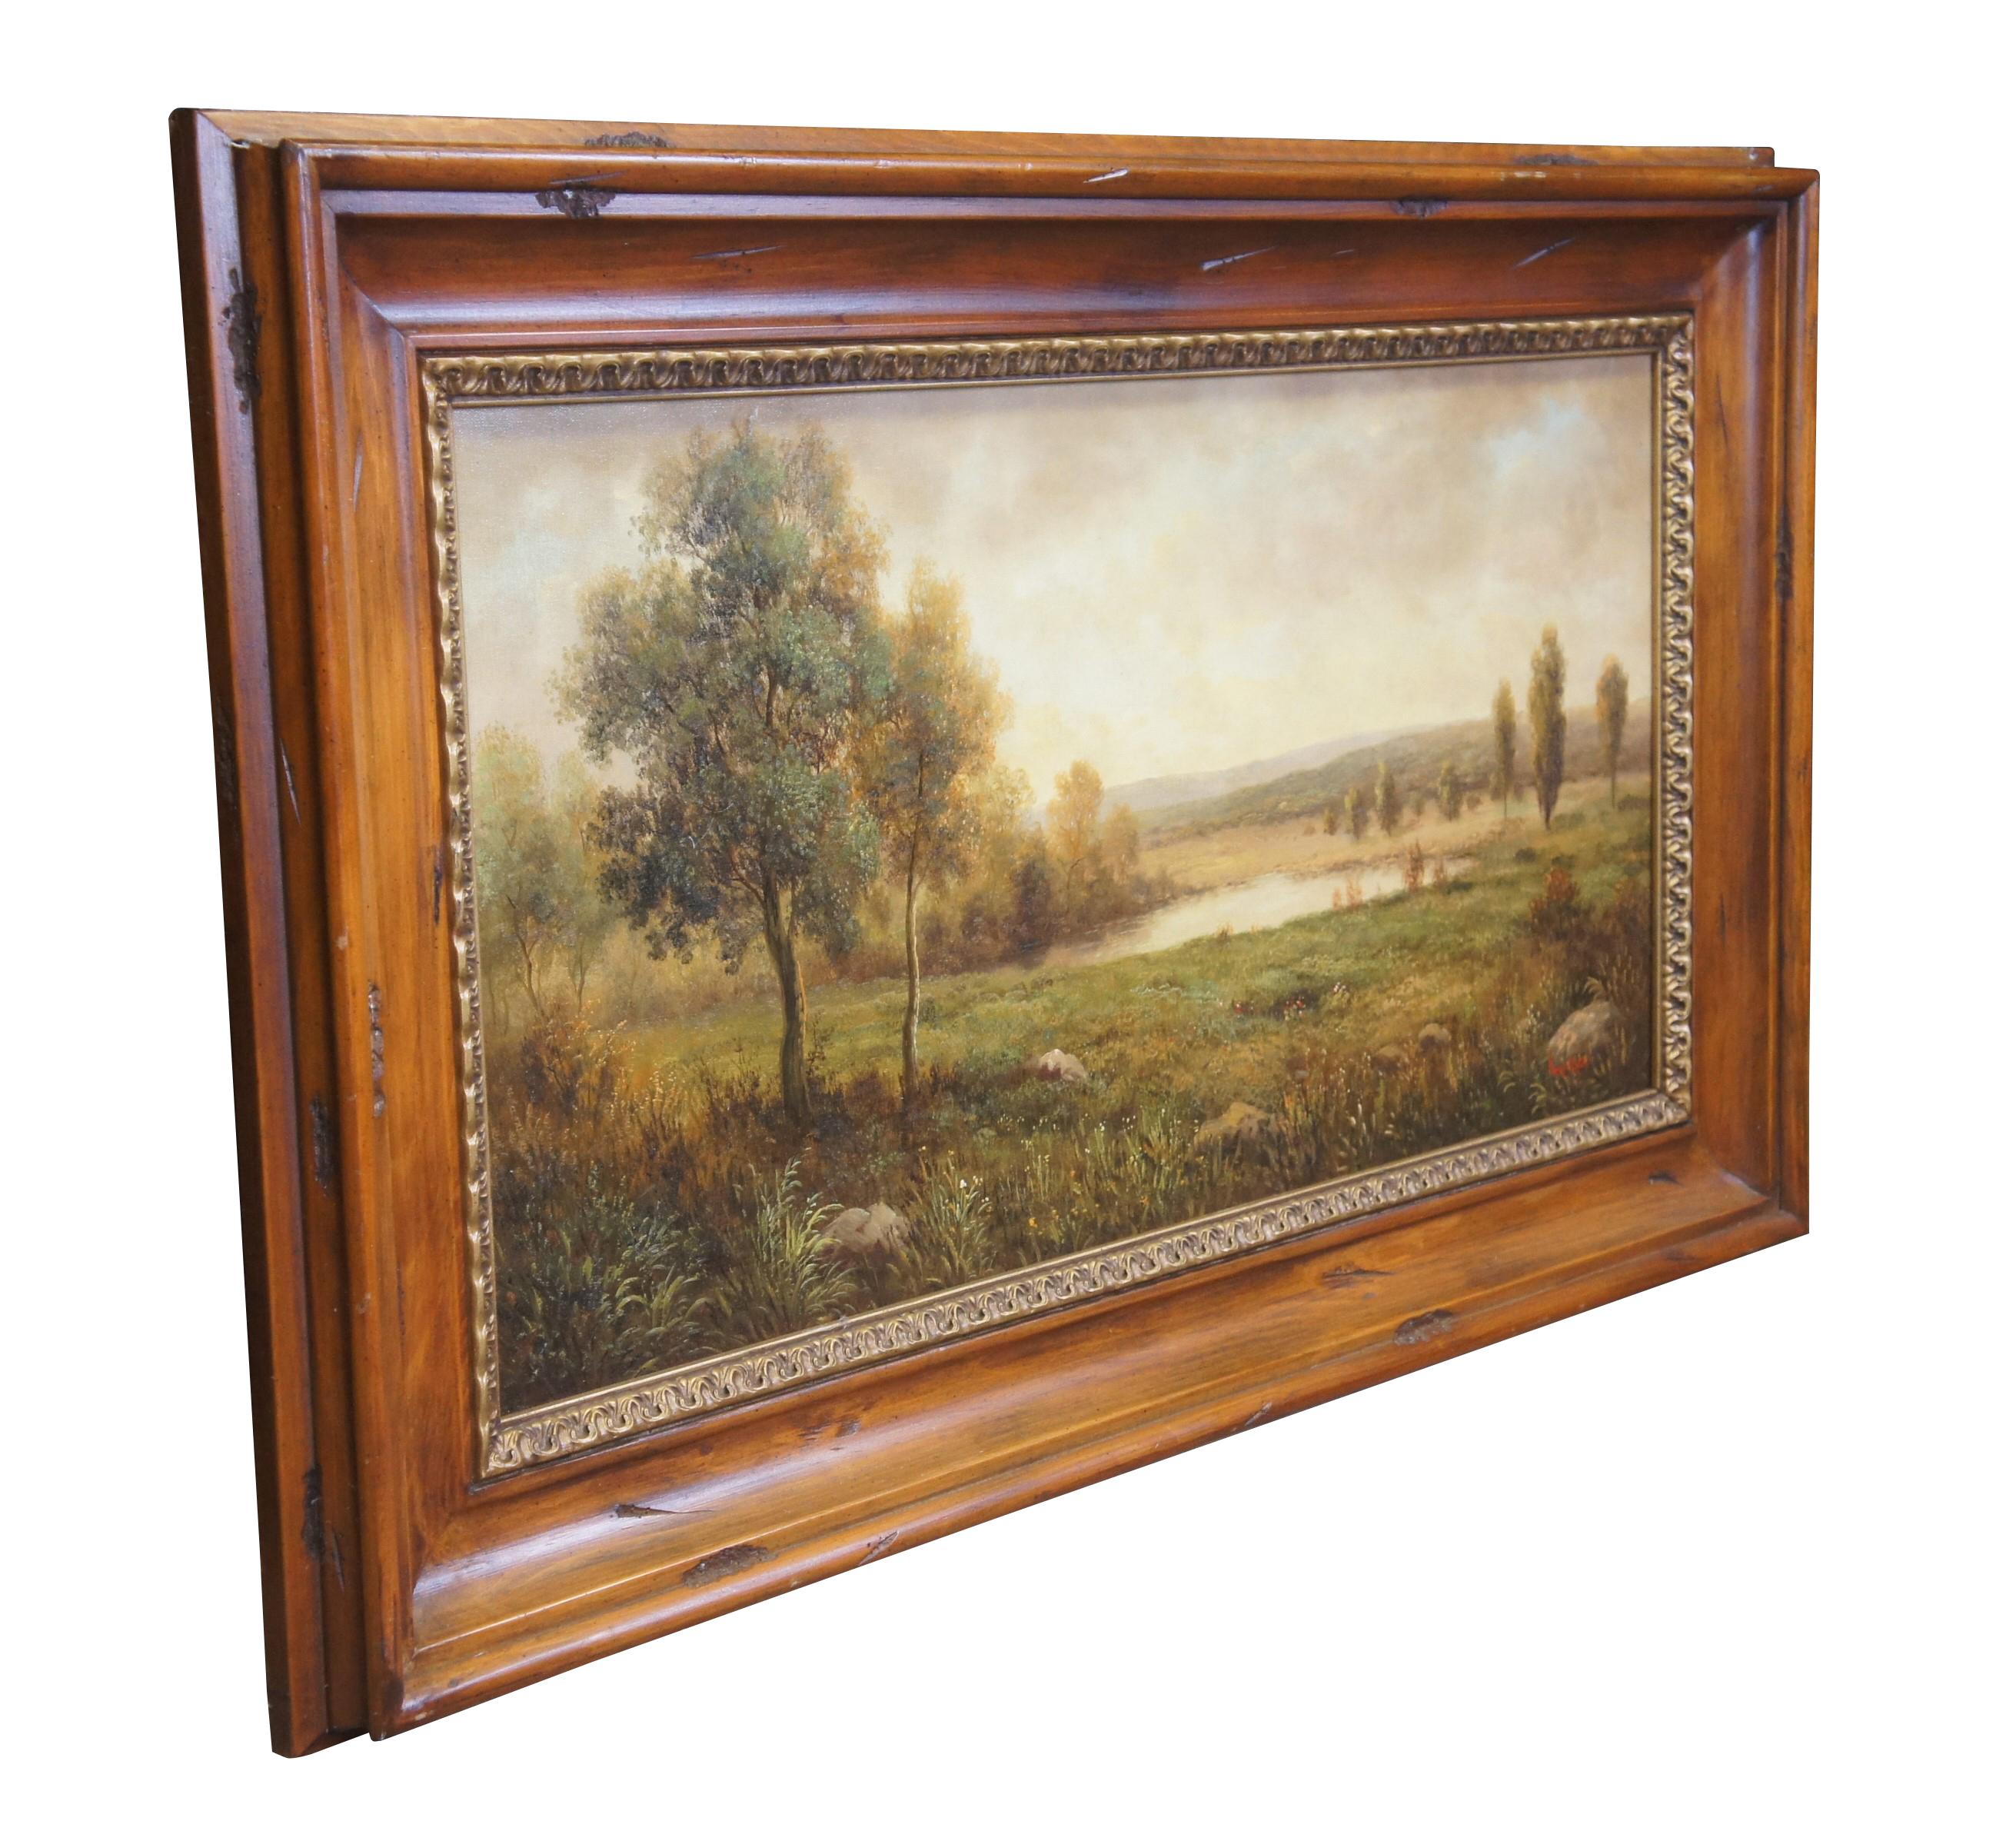 Vintage oil painting on canvas by Korean artist SH Song (aka Humphrey).  Features a pastoral countryside landscape of trees, mountains and a lake.  Framed in rustic cherry pine frame.

About the artist:
Born in Seoul, South Korea in 1955, S.H. Song